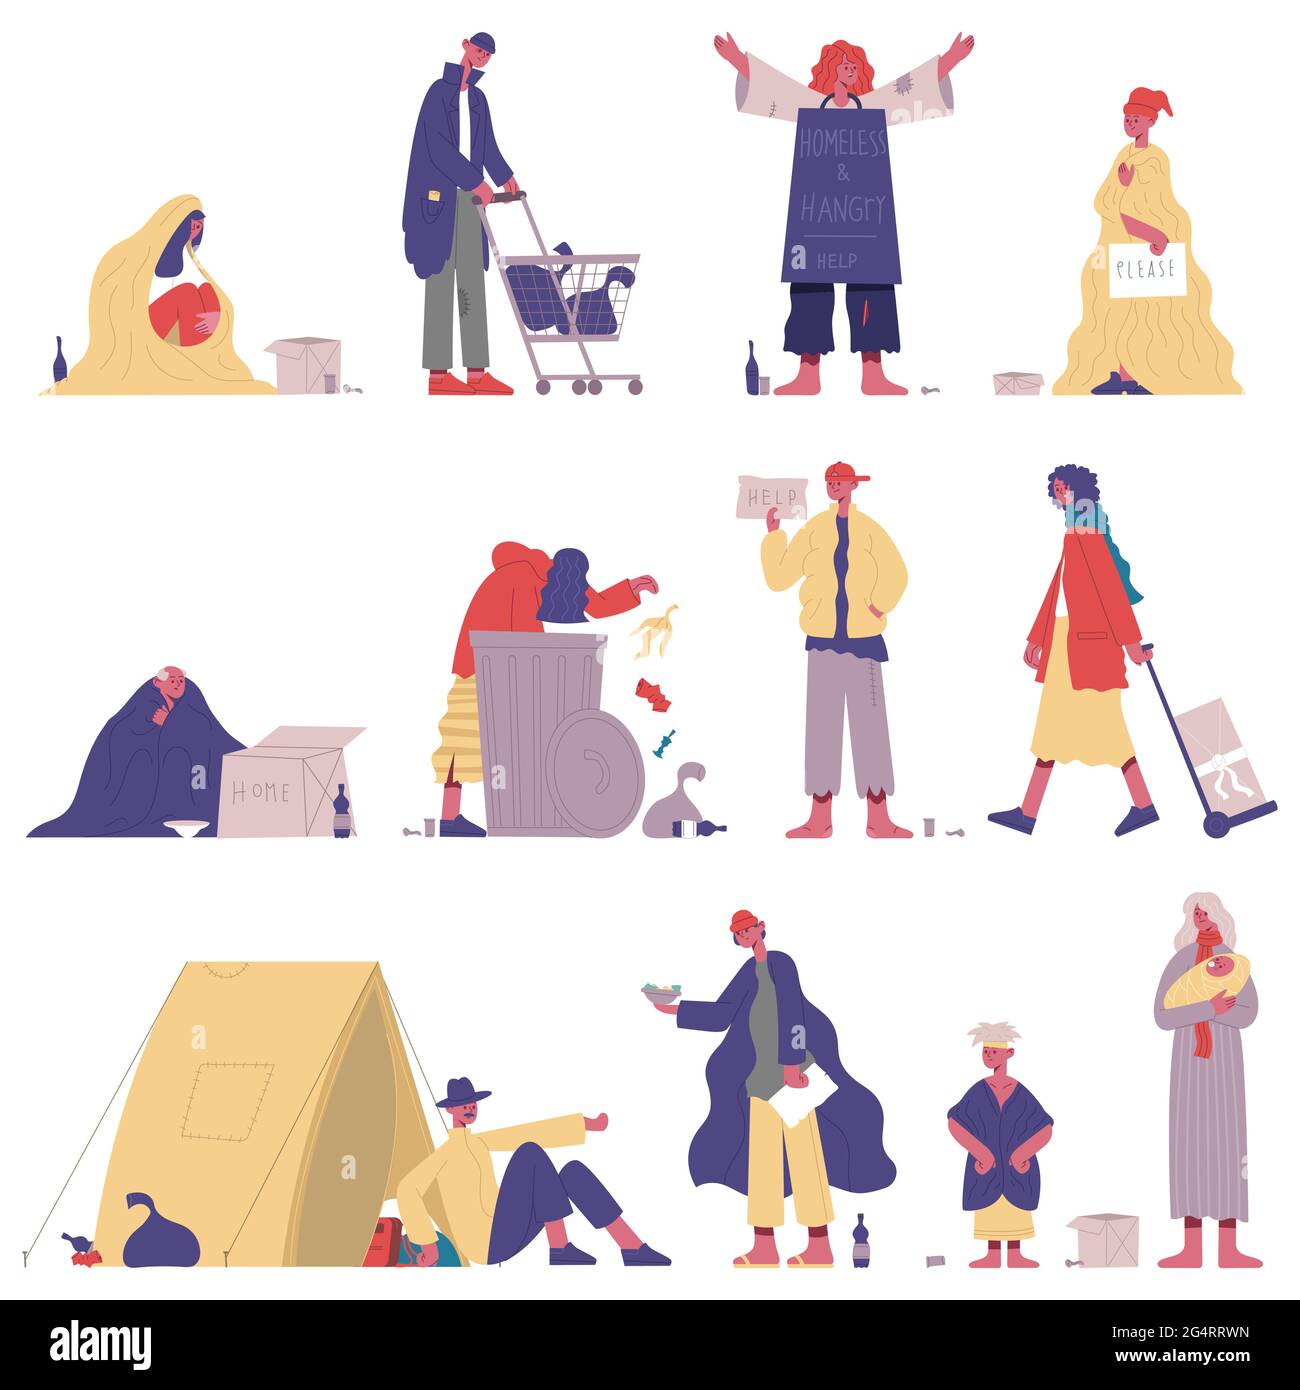 Poor homeless people. Hungry, dirty beggar characters, adult homeless unemployed need help and money vector illustration set. Homeless beggar people Stock Vector